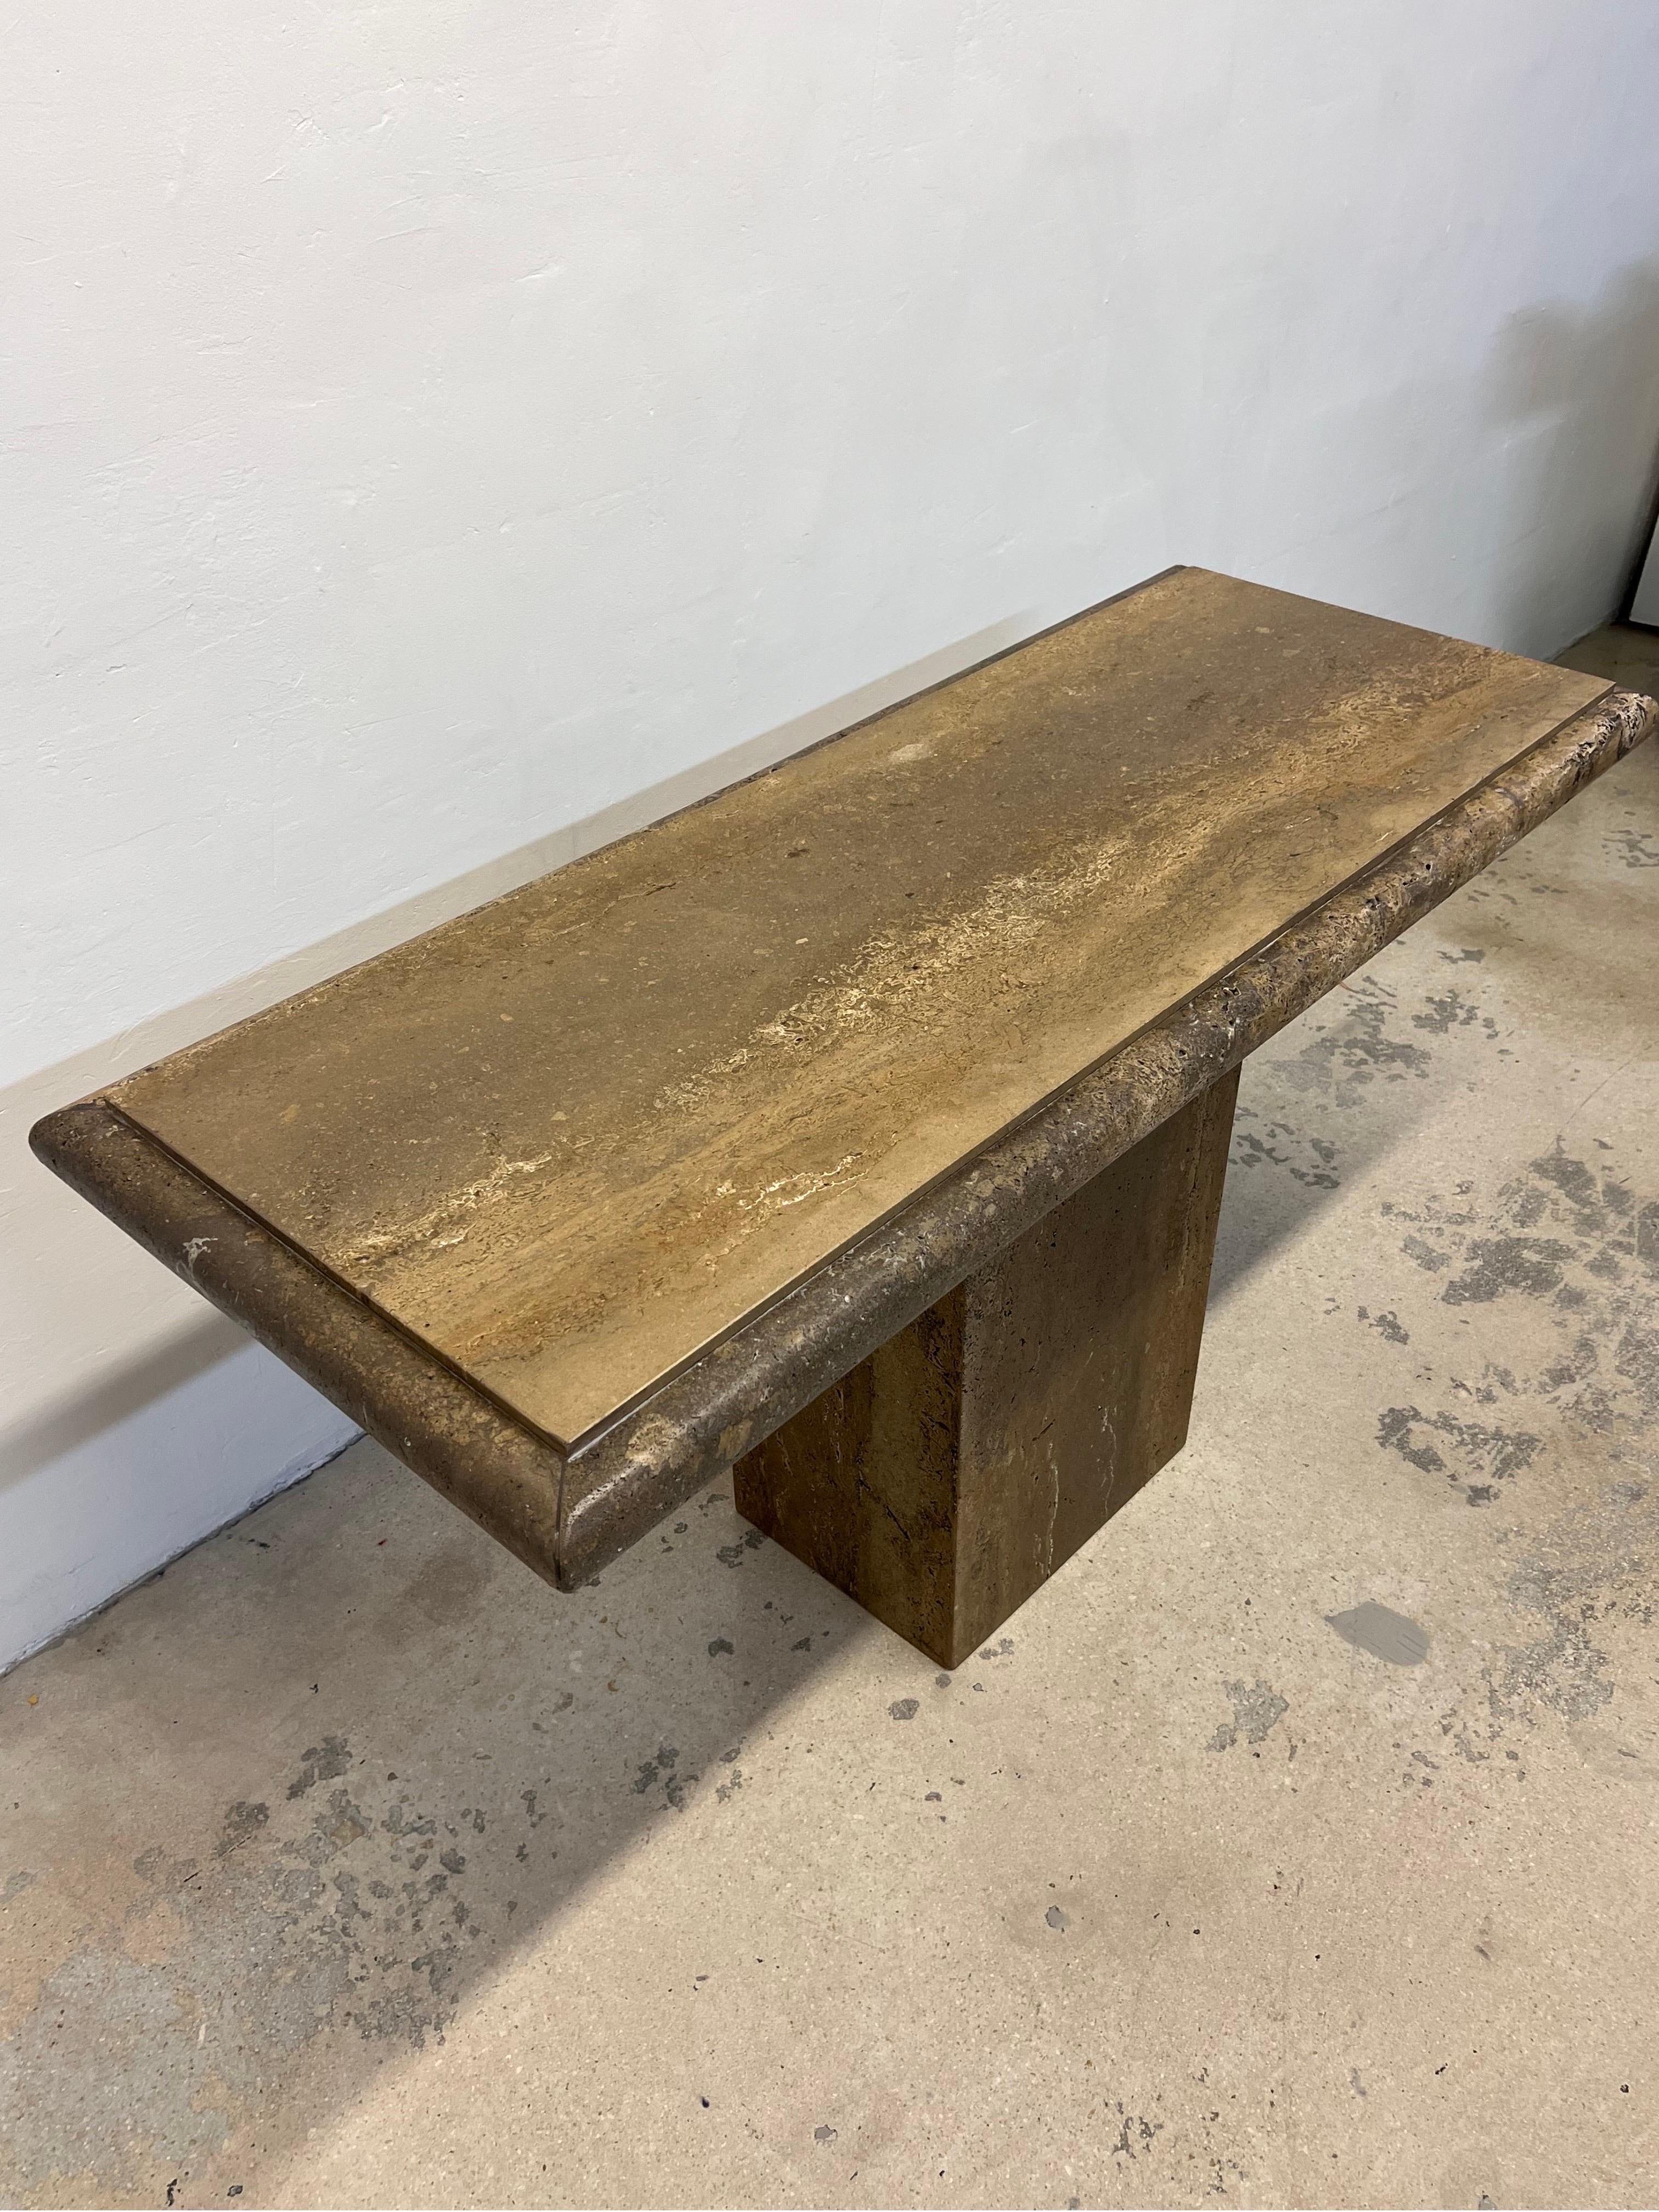 Polished Italian Travertine Bullnose Console Table, Italy 1970s For Sale 5